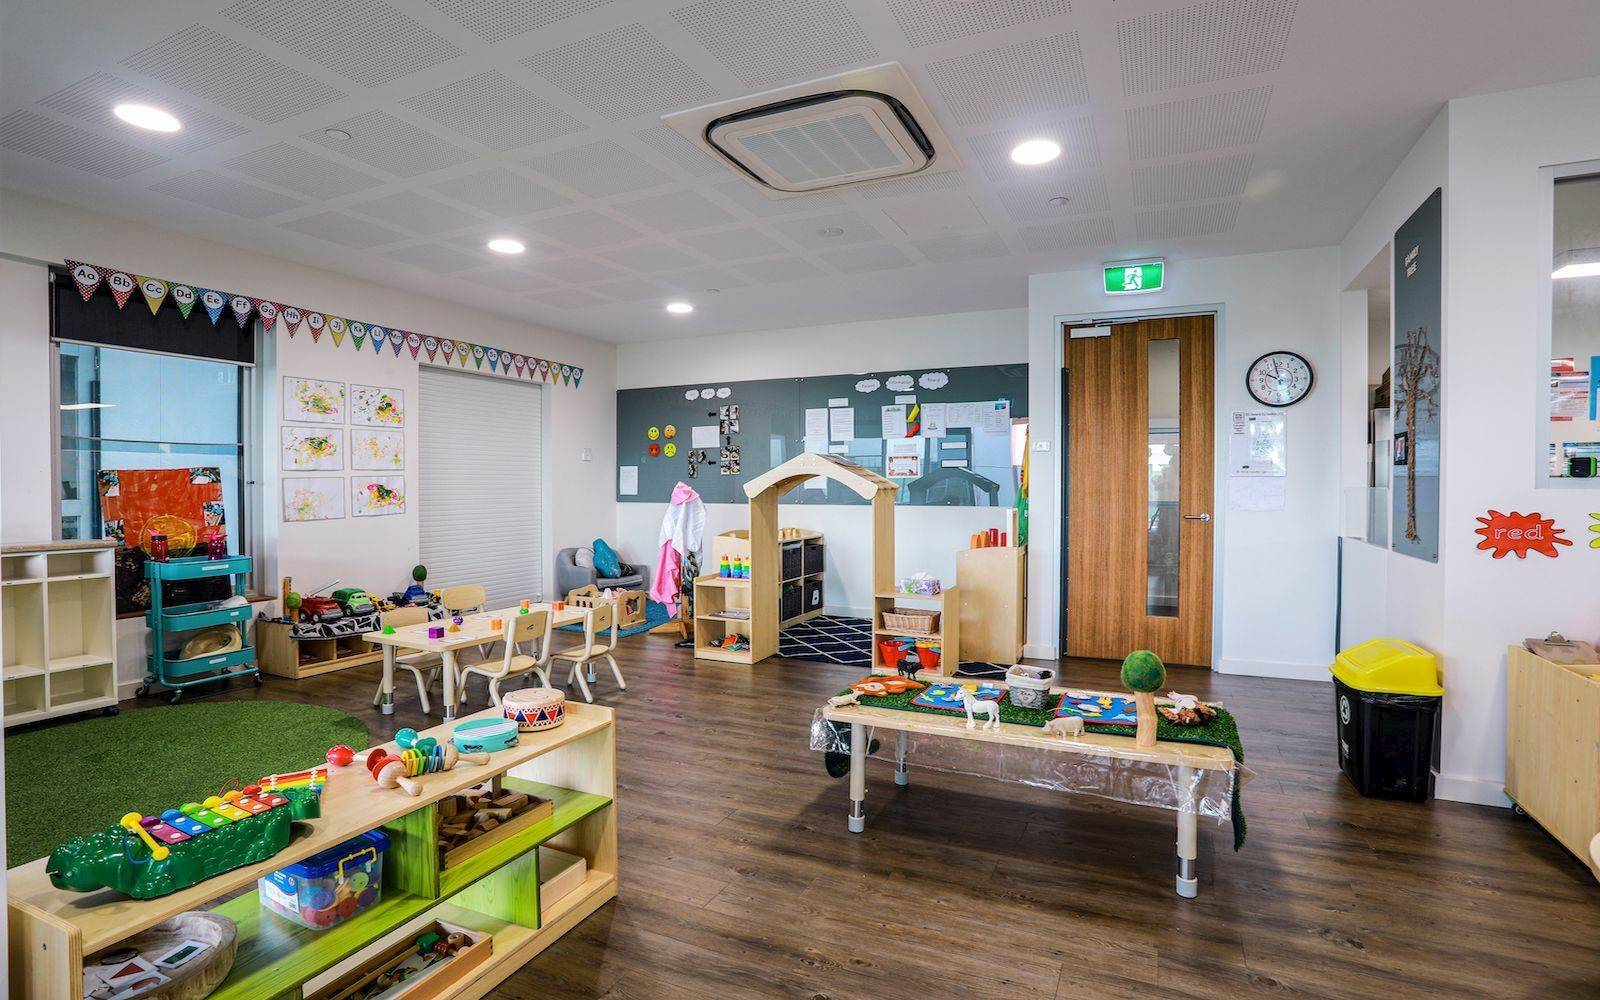 Little Lane Early Learning Centre - Hawthorn